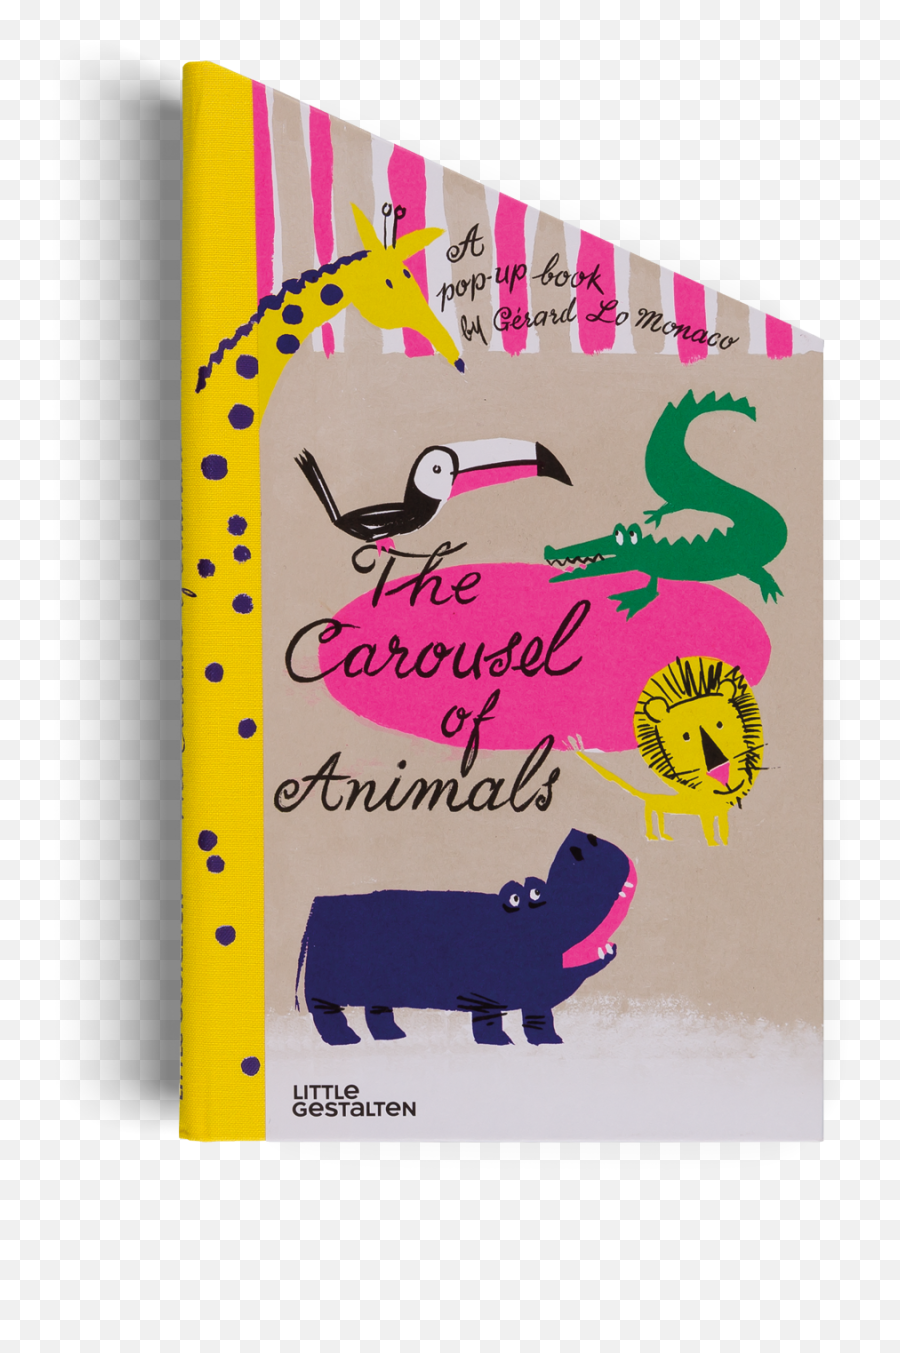 The Carousel Of Animals Png